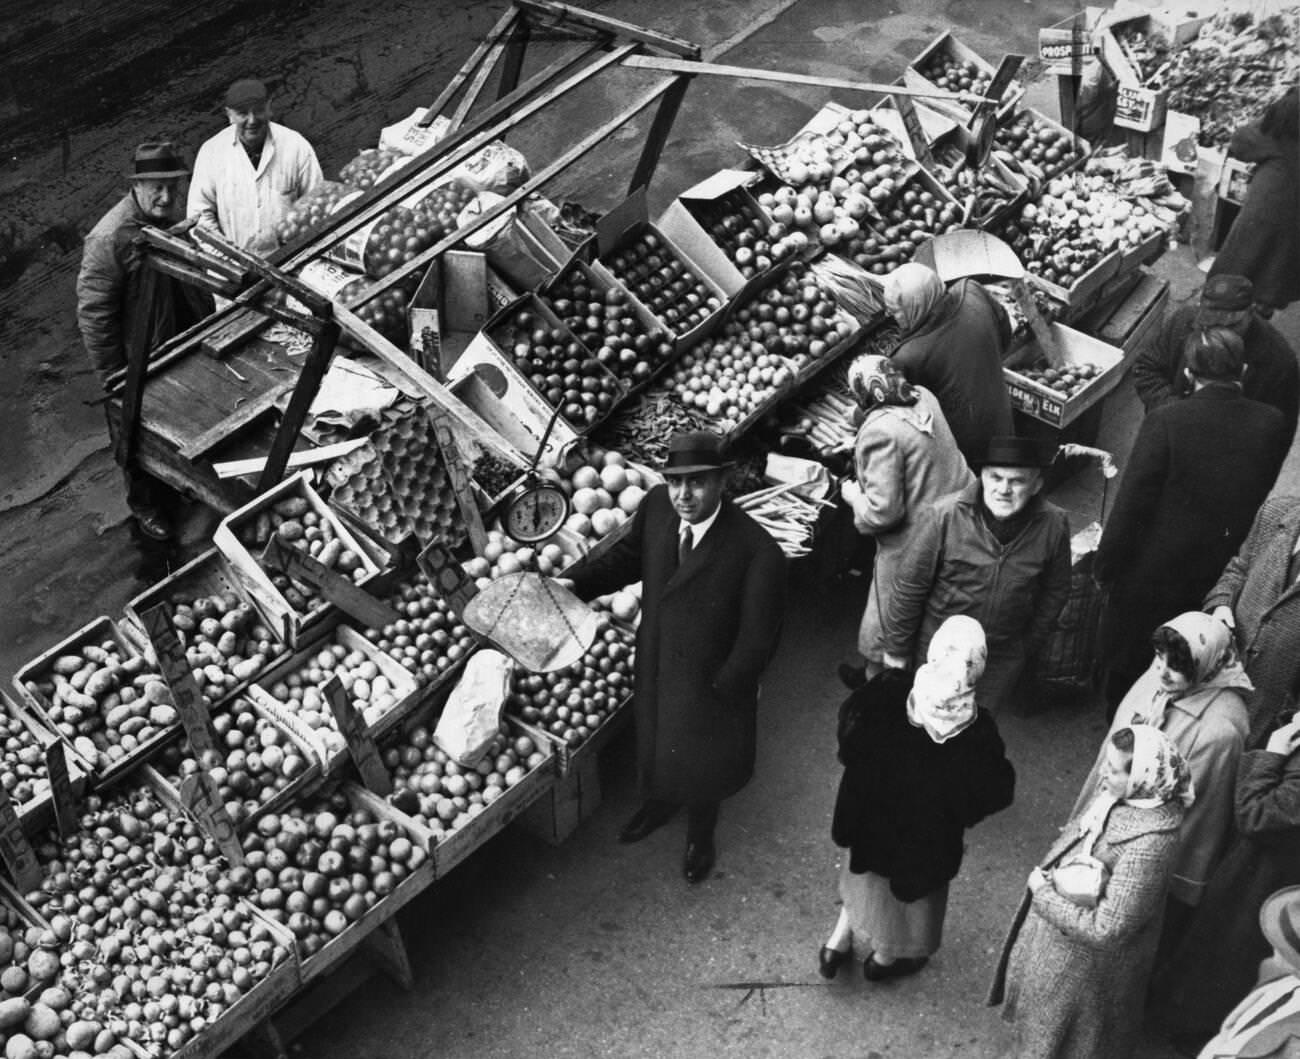 Closing Of Pushcart Market At Saratoga Avenue And Prospect Place, Brooklyn, 1962.